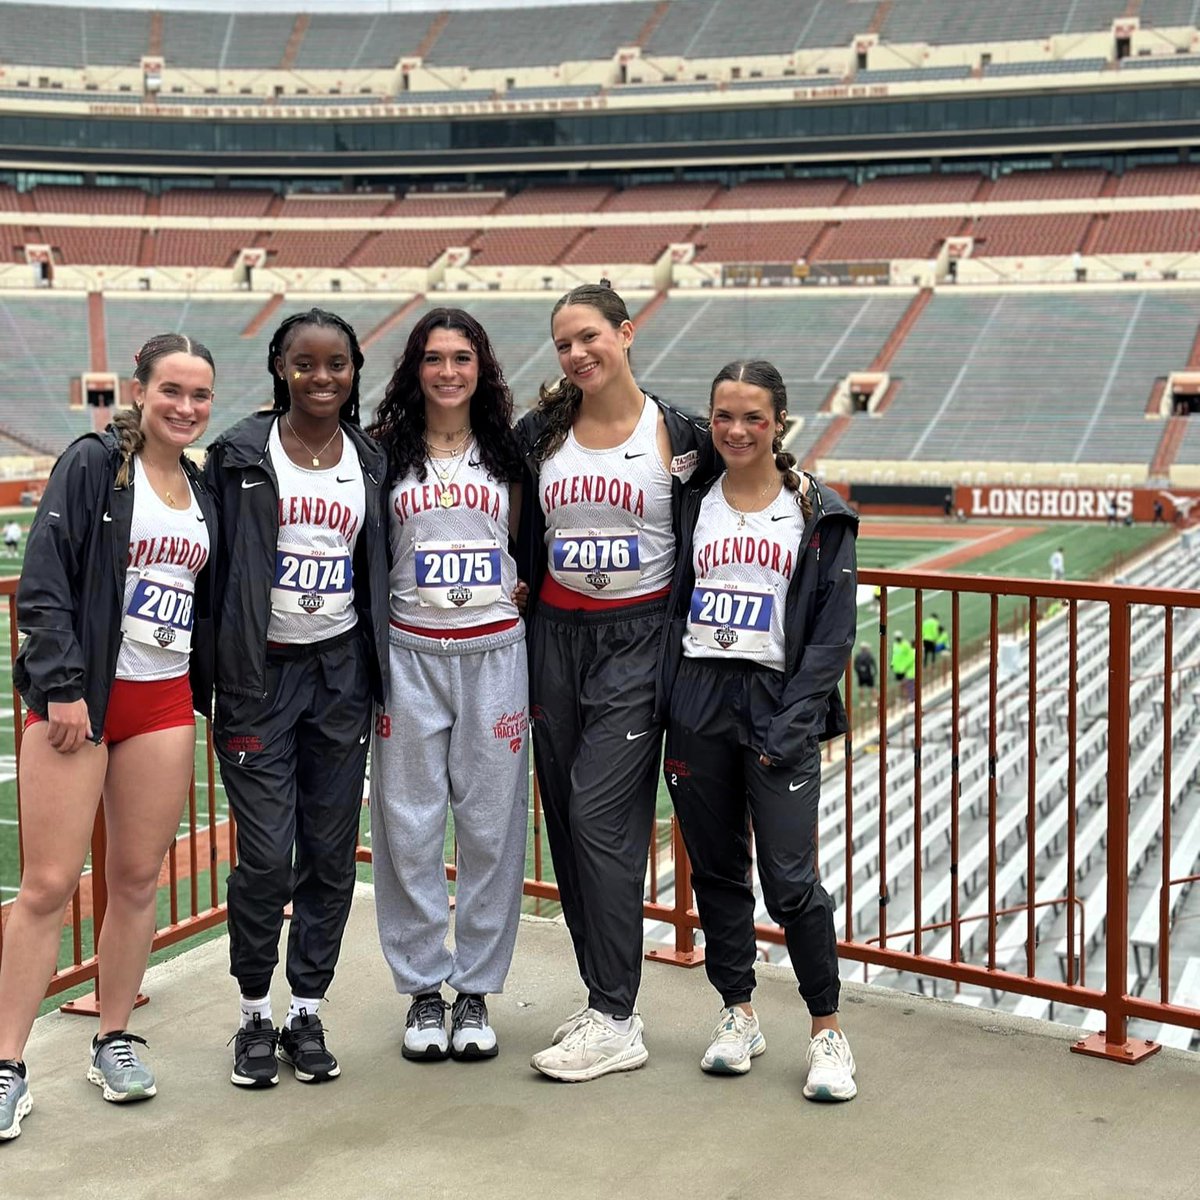 The LadyCats shone at the State Track Meet! 4x100 relay (Avery Thornton, Sierra Jackson, Addison Thornton, Rylee Lock) placed 7th overall, setting a new season record (48.64)! Sierra Jackson: 9th place in the 400m We are proud...#WeAreSplendora